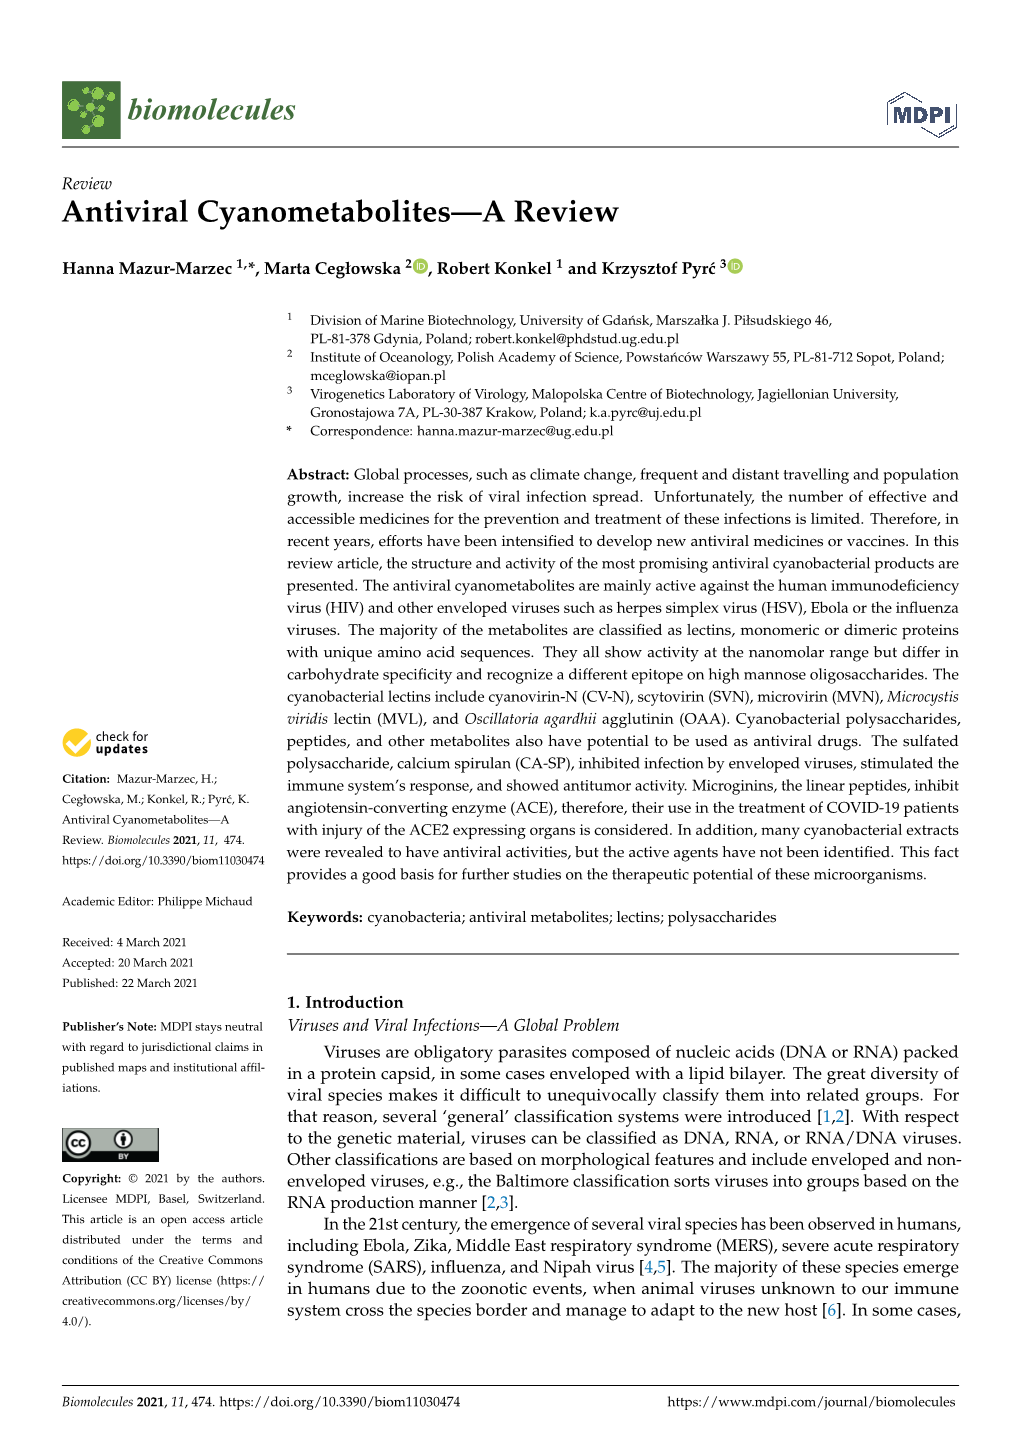 Antiviral Cyanometabolites—A Review